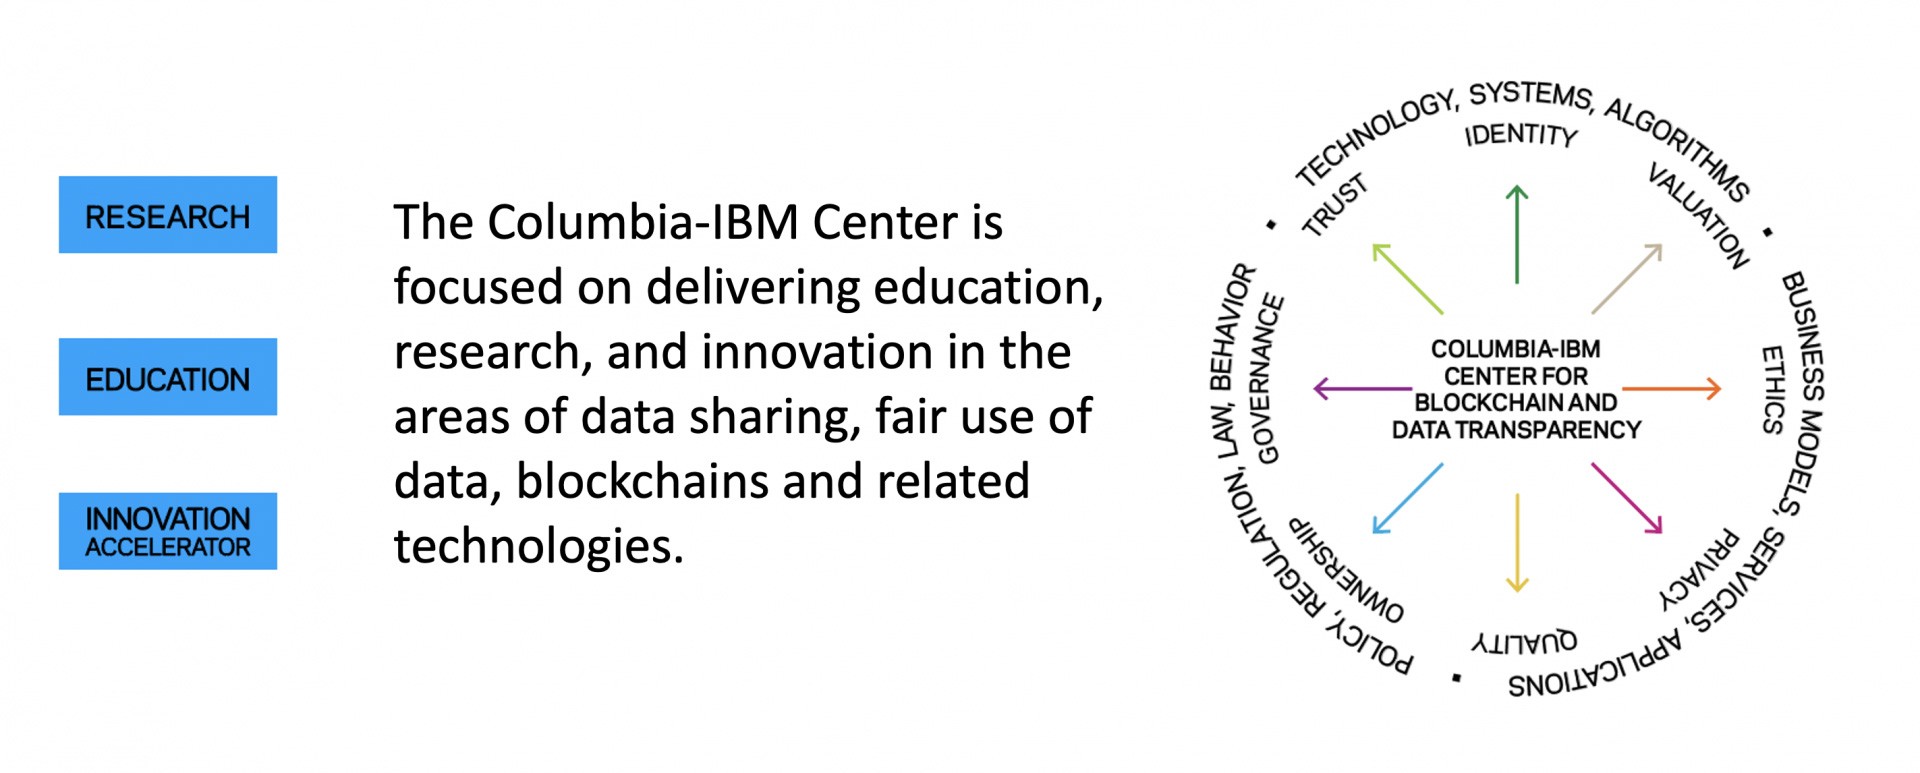 The Columbia IBM Center for Blockchain and Data Transparency Showcase 2021